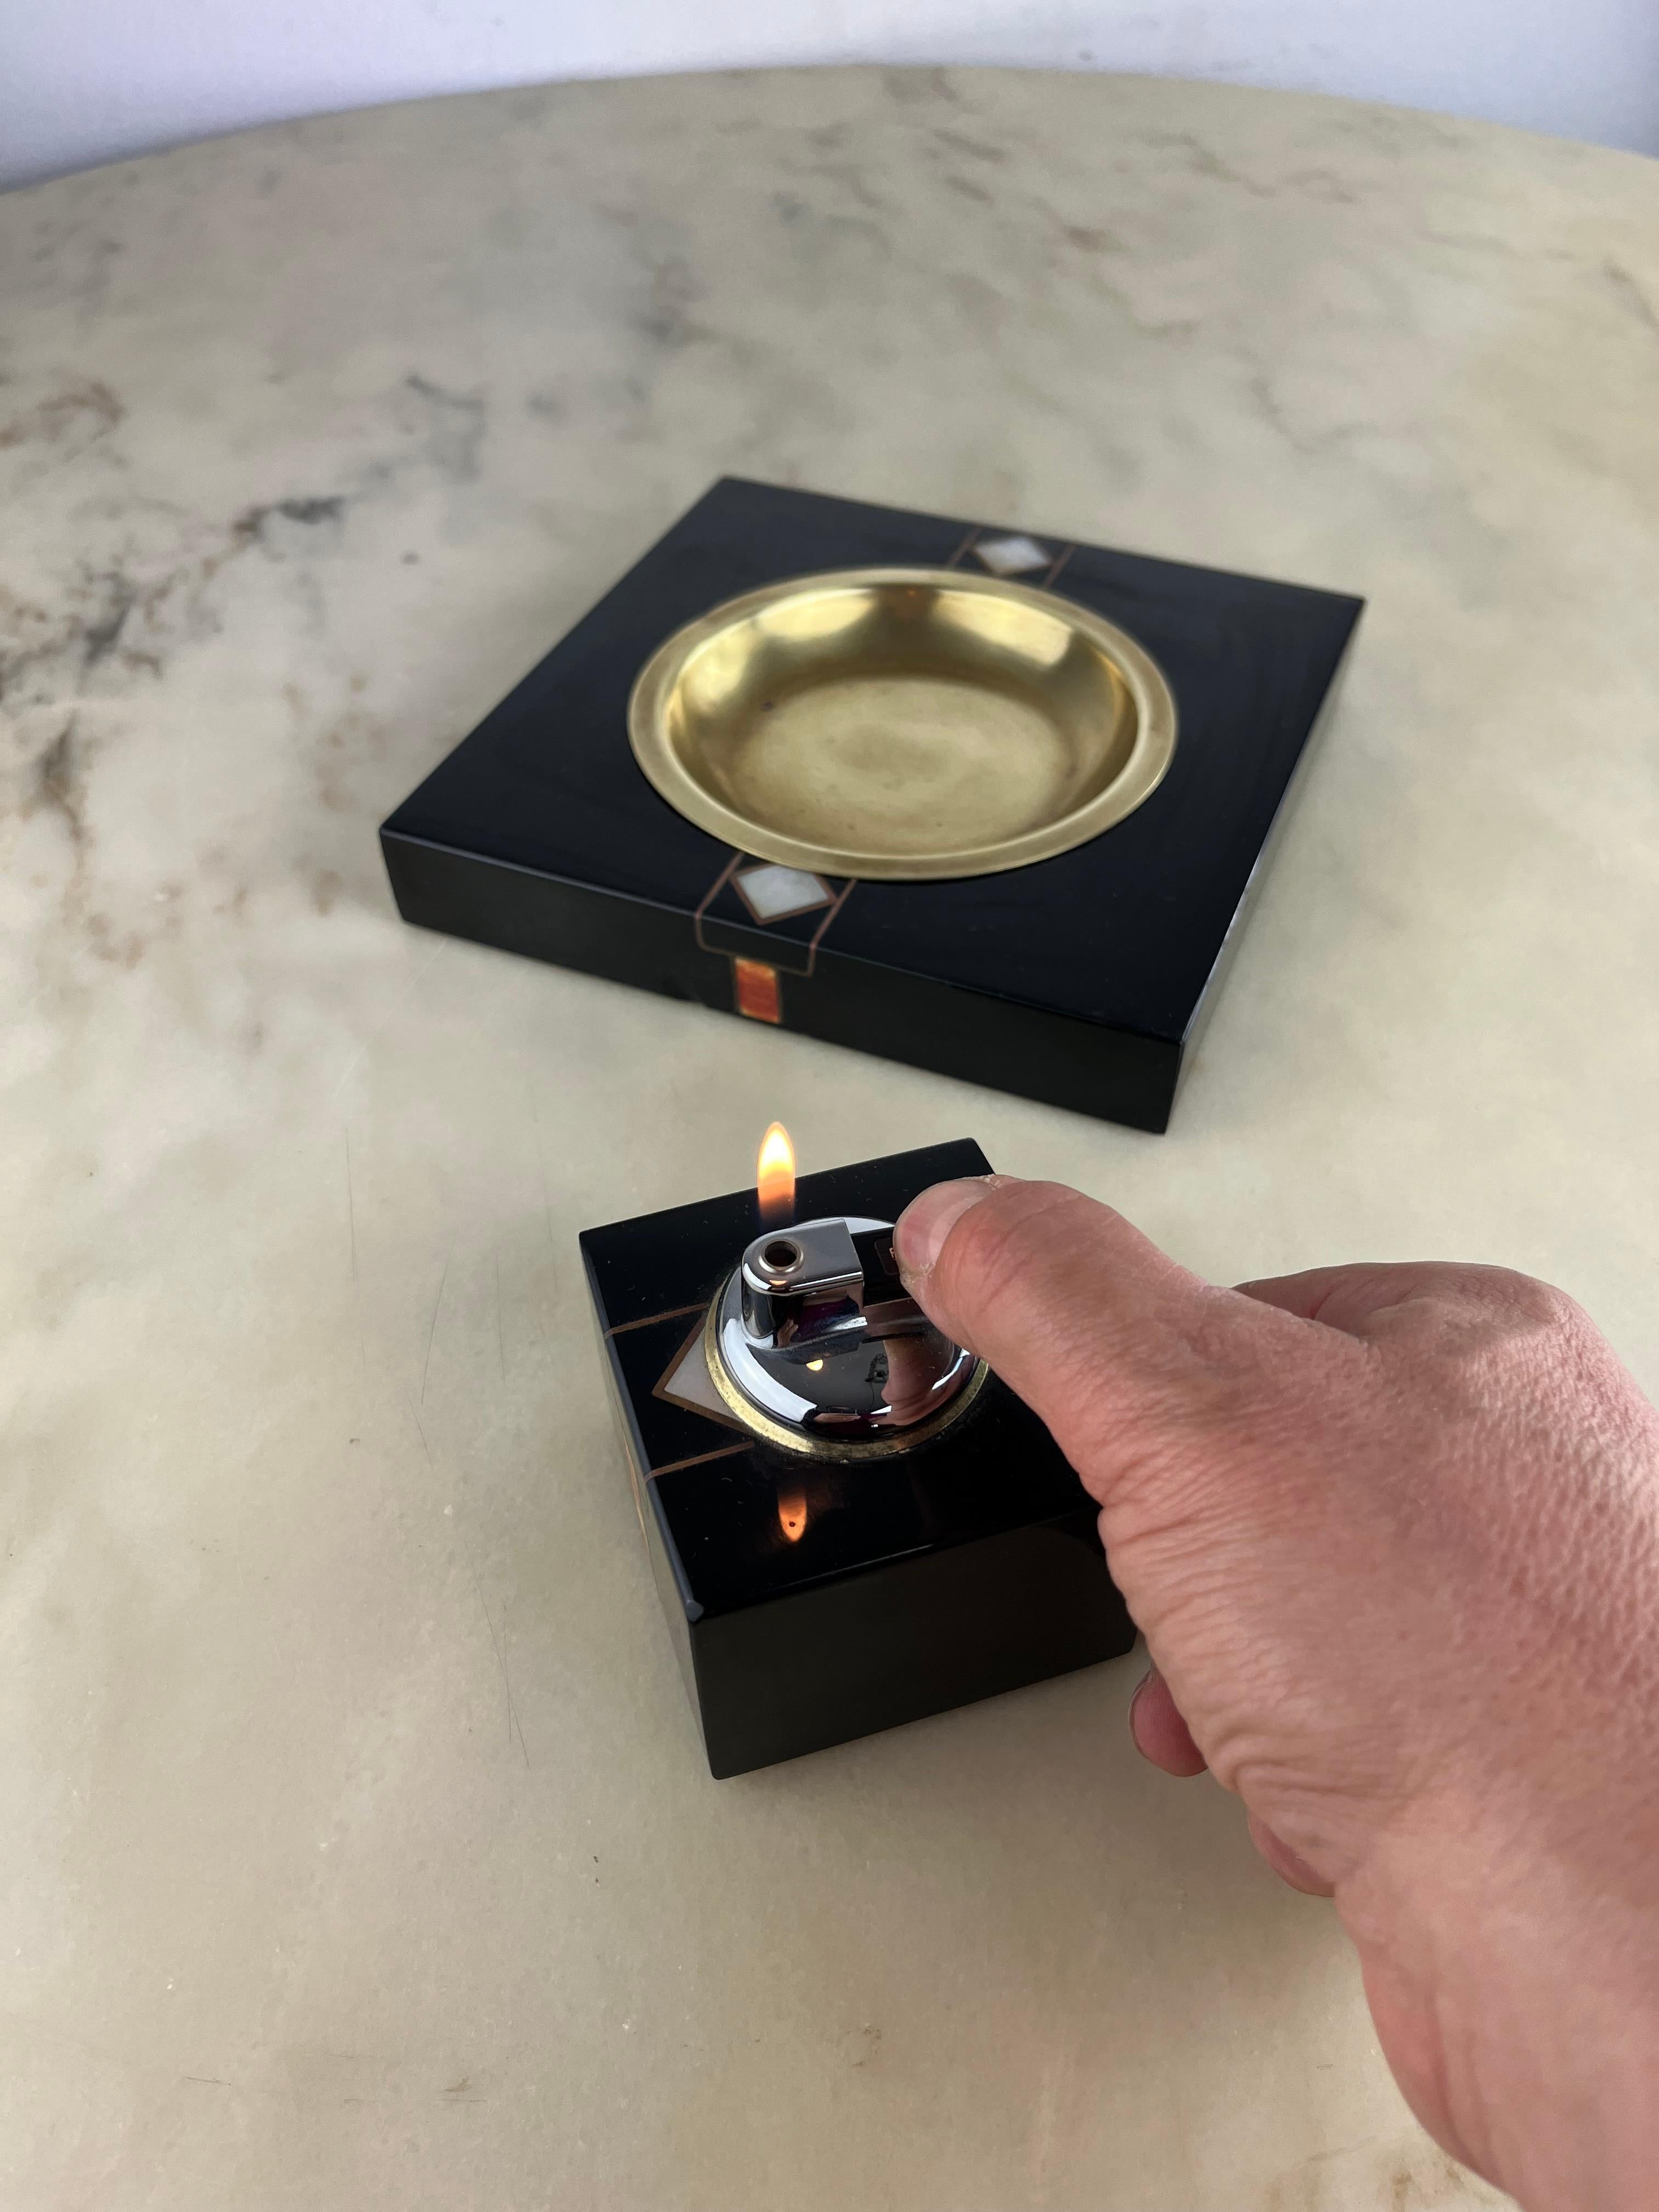 Set of 2 Ashtrays and table lighter Vintage, Italian design, 1970s.
The ashtray is made of brass and decorated wood. It measures 20 cm x 20 cm x 3 cm high.
 The lighter measures 7.5 cm x 7.5 cm and is 9 cm high.
Intact and in good condition, small